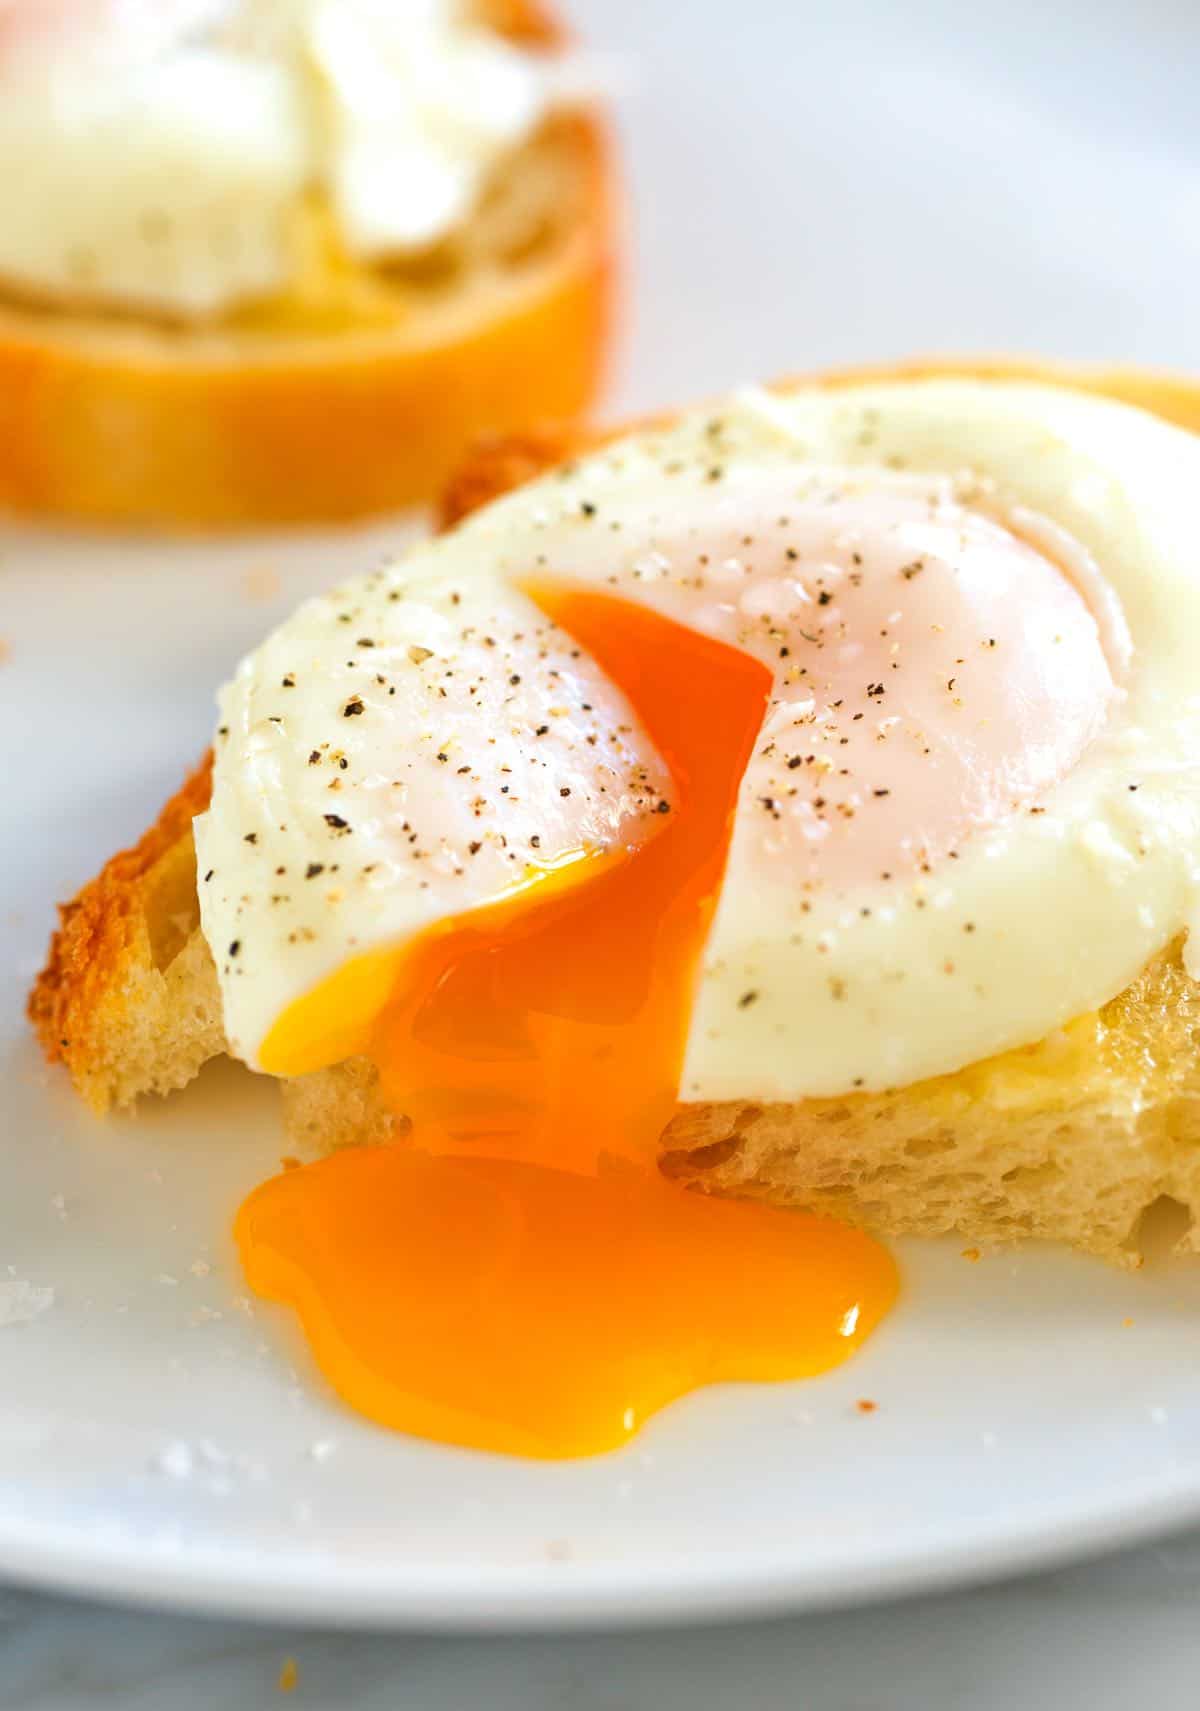 Easy Poached Eggs with runny yolks on Toast